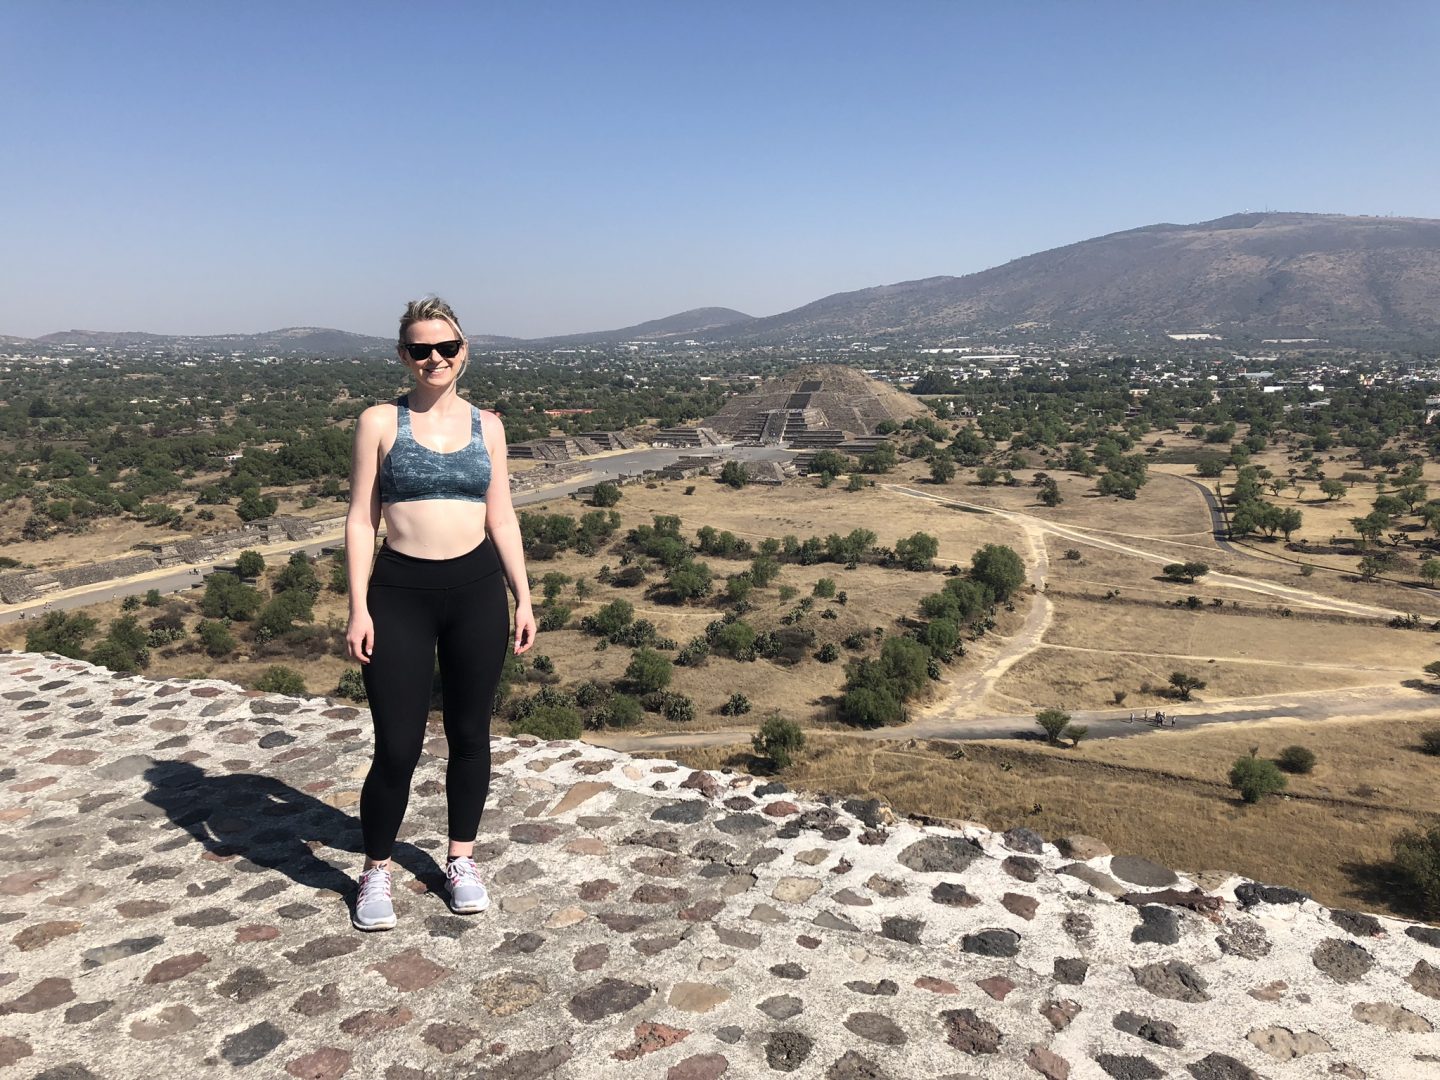 Laura on top of the Pyramid of the Sun, Teotihuacan